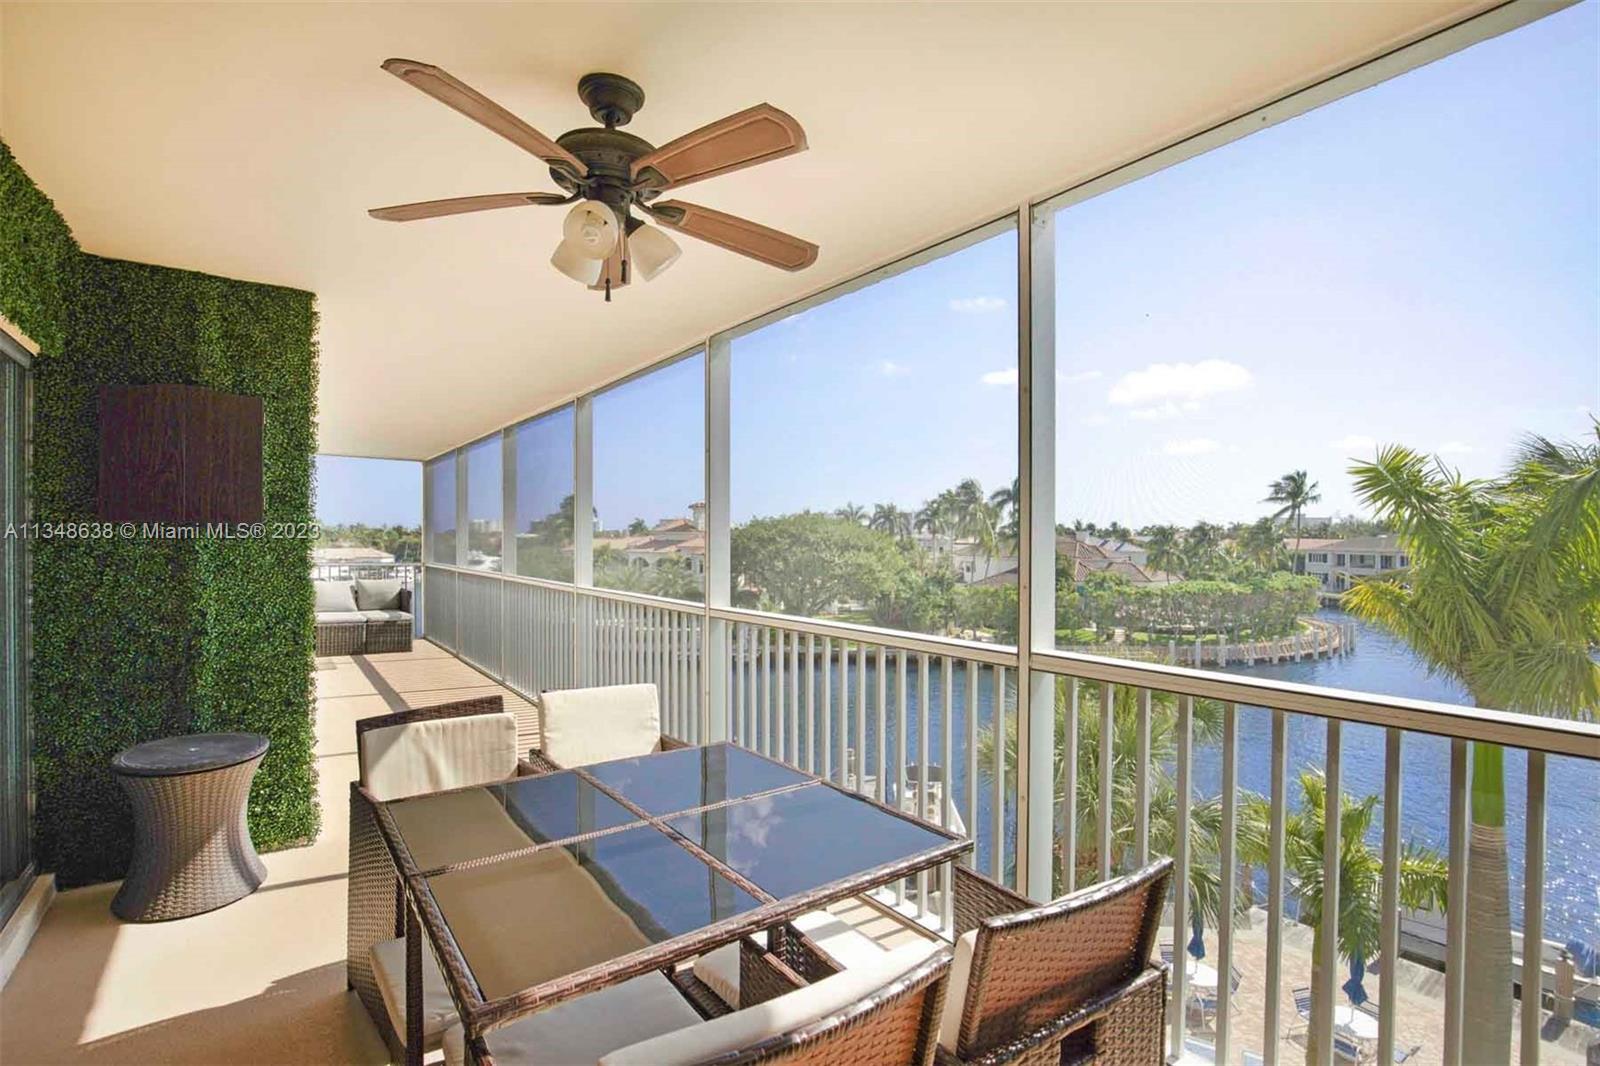 Rare opportunity to own this incredible 2/2 waterfront condo that has been professionally decorated/